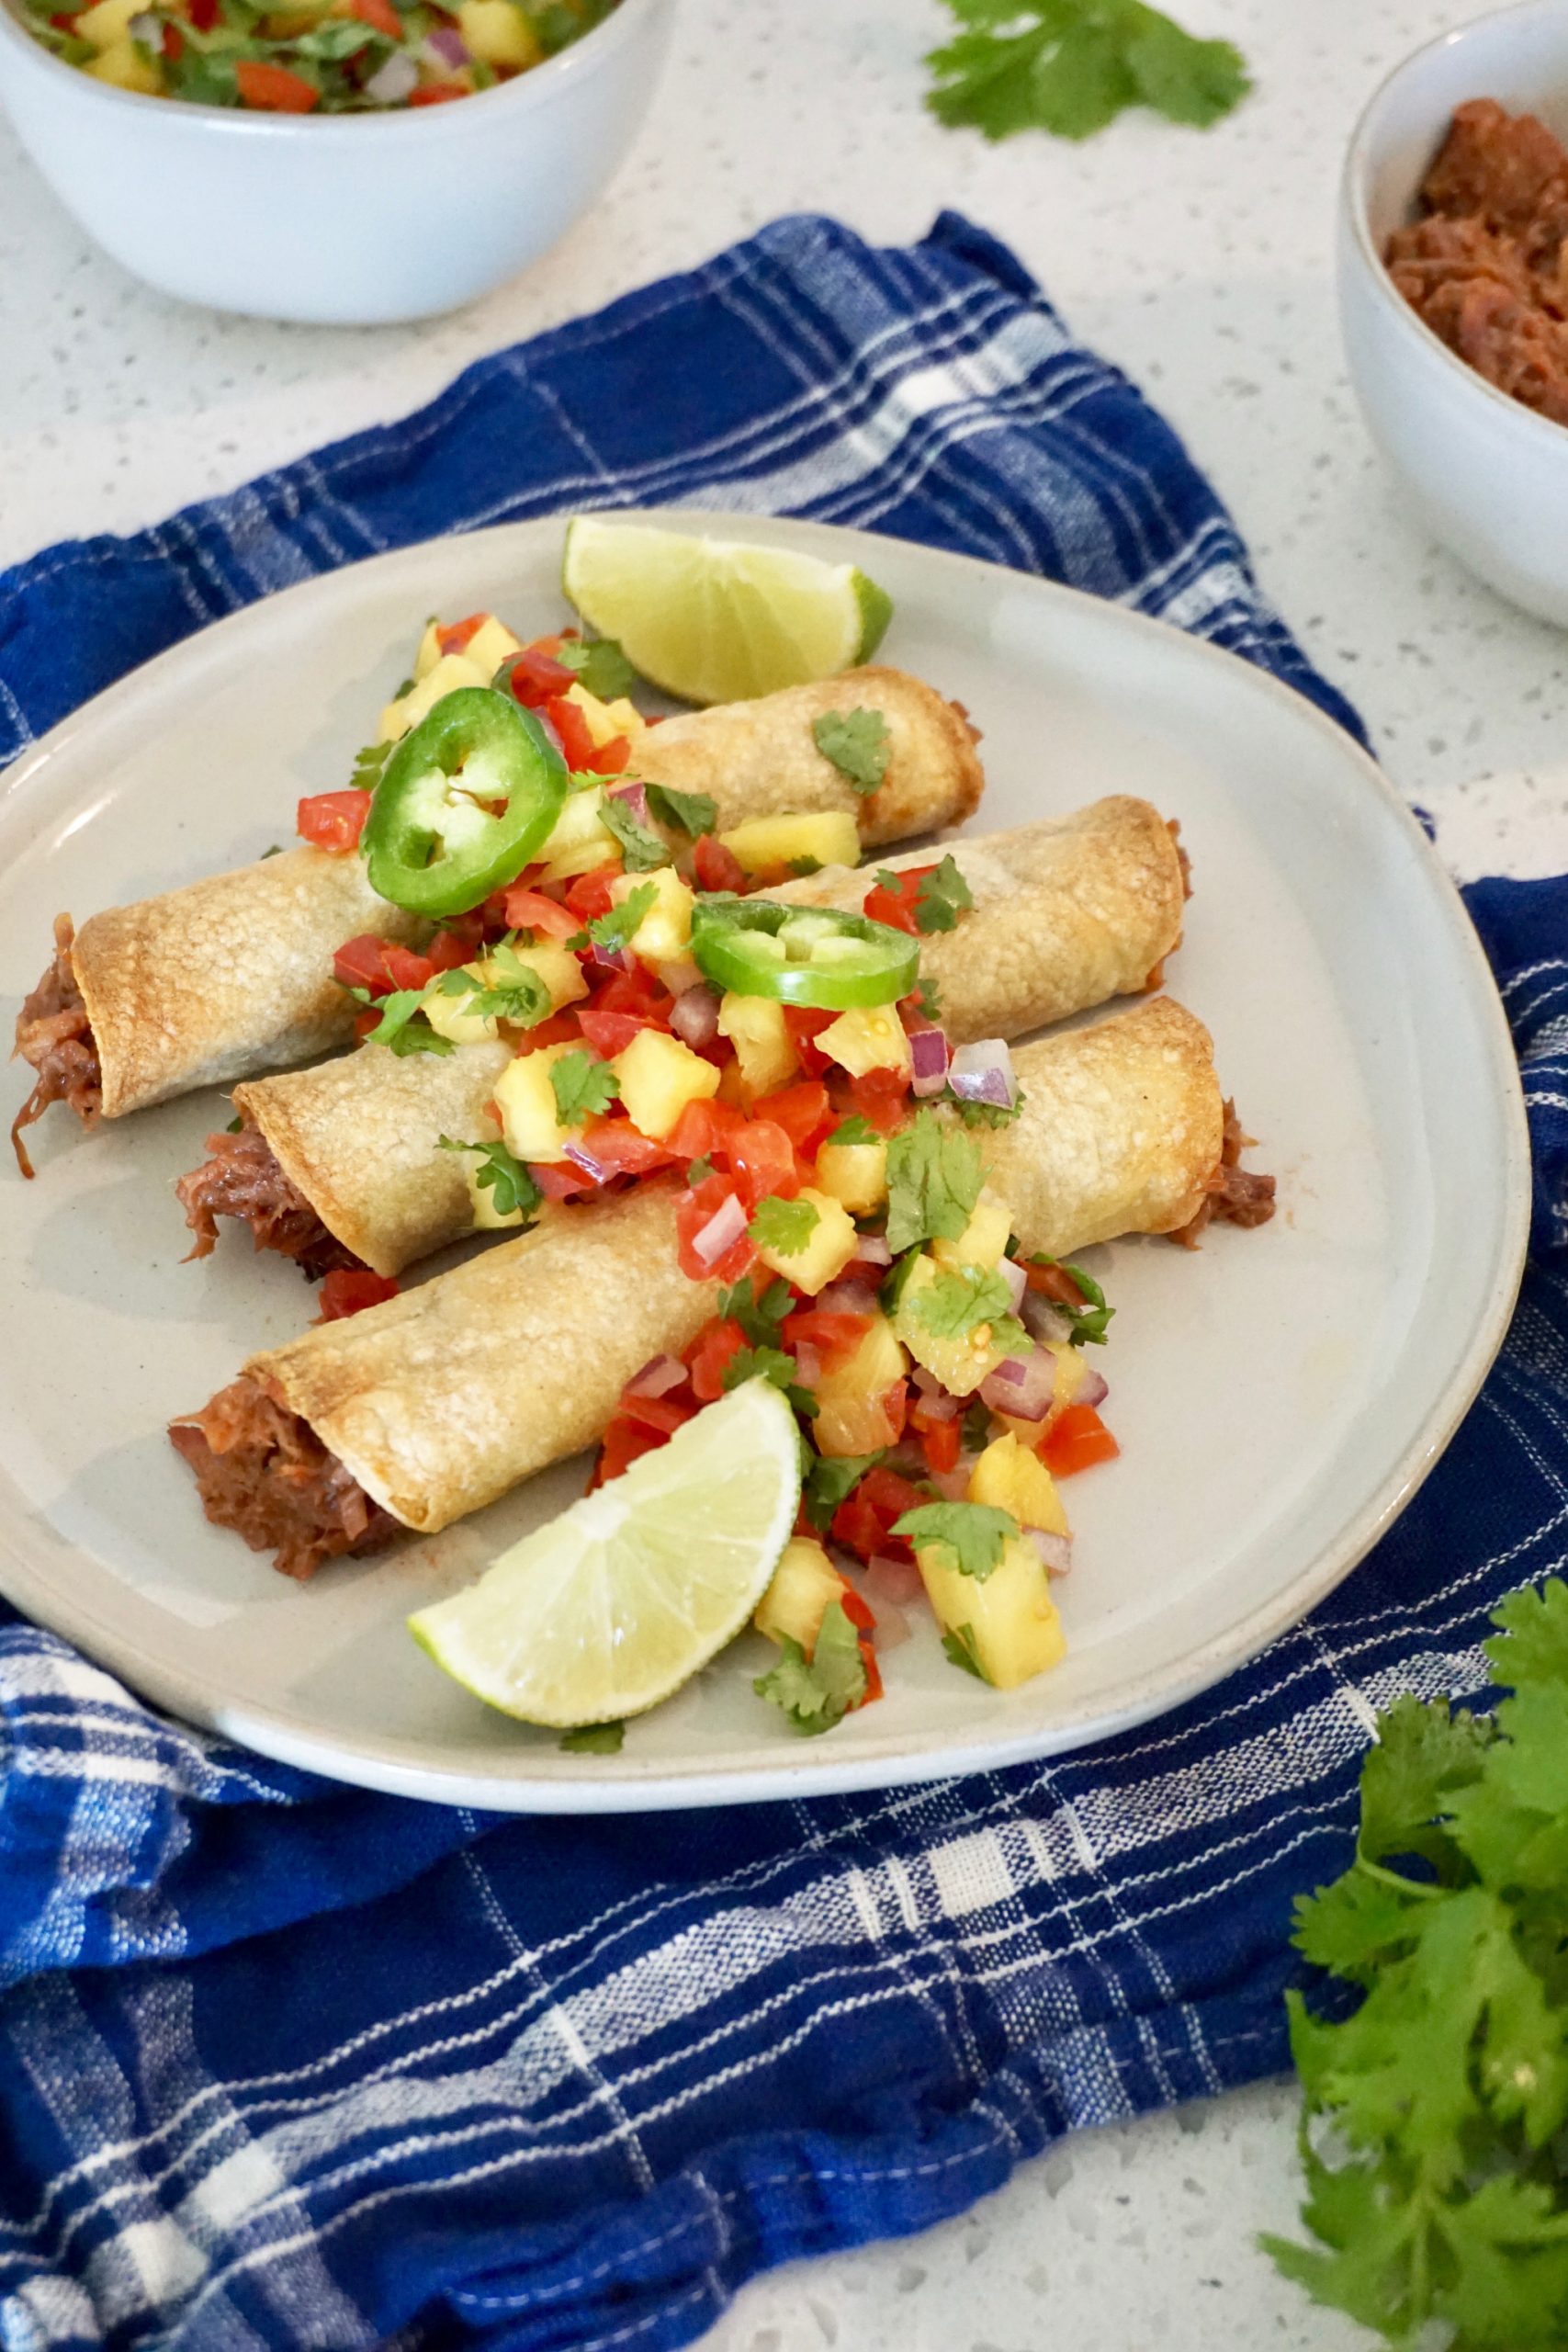 Pulled pork taquitos with pineapple salsa